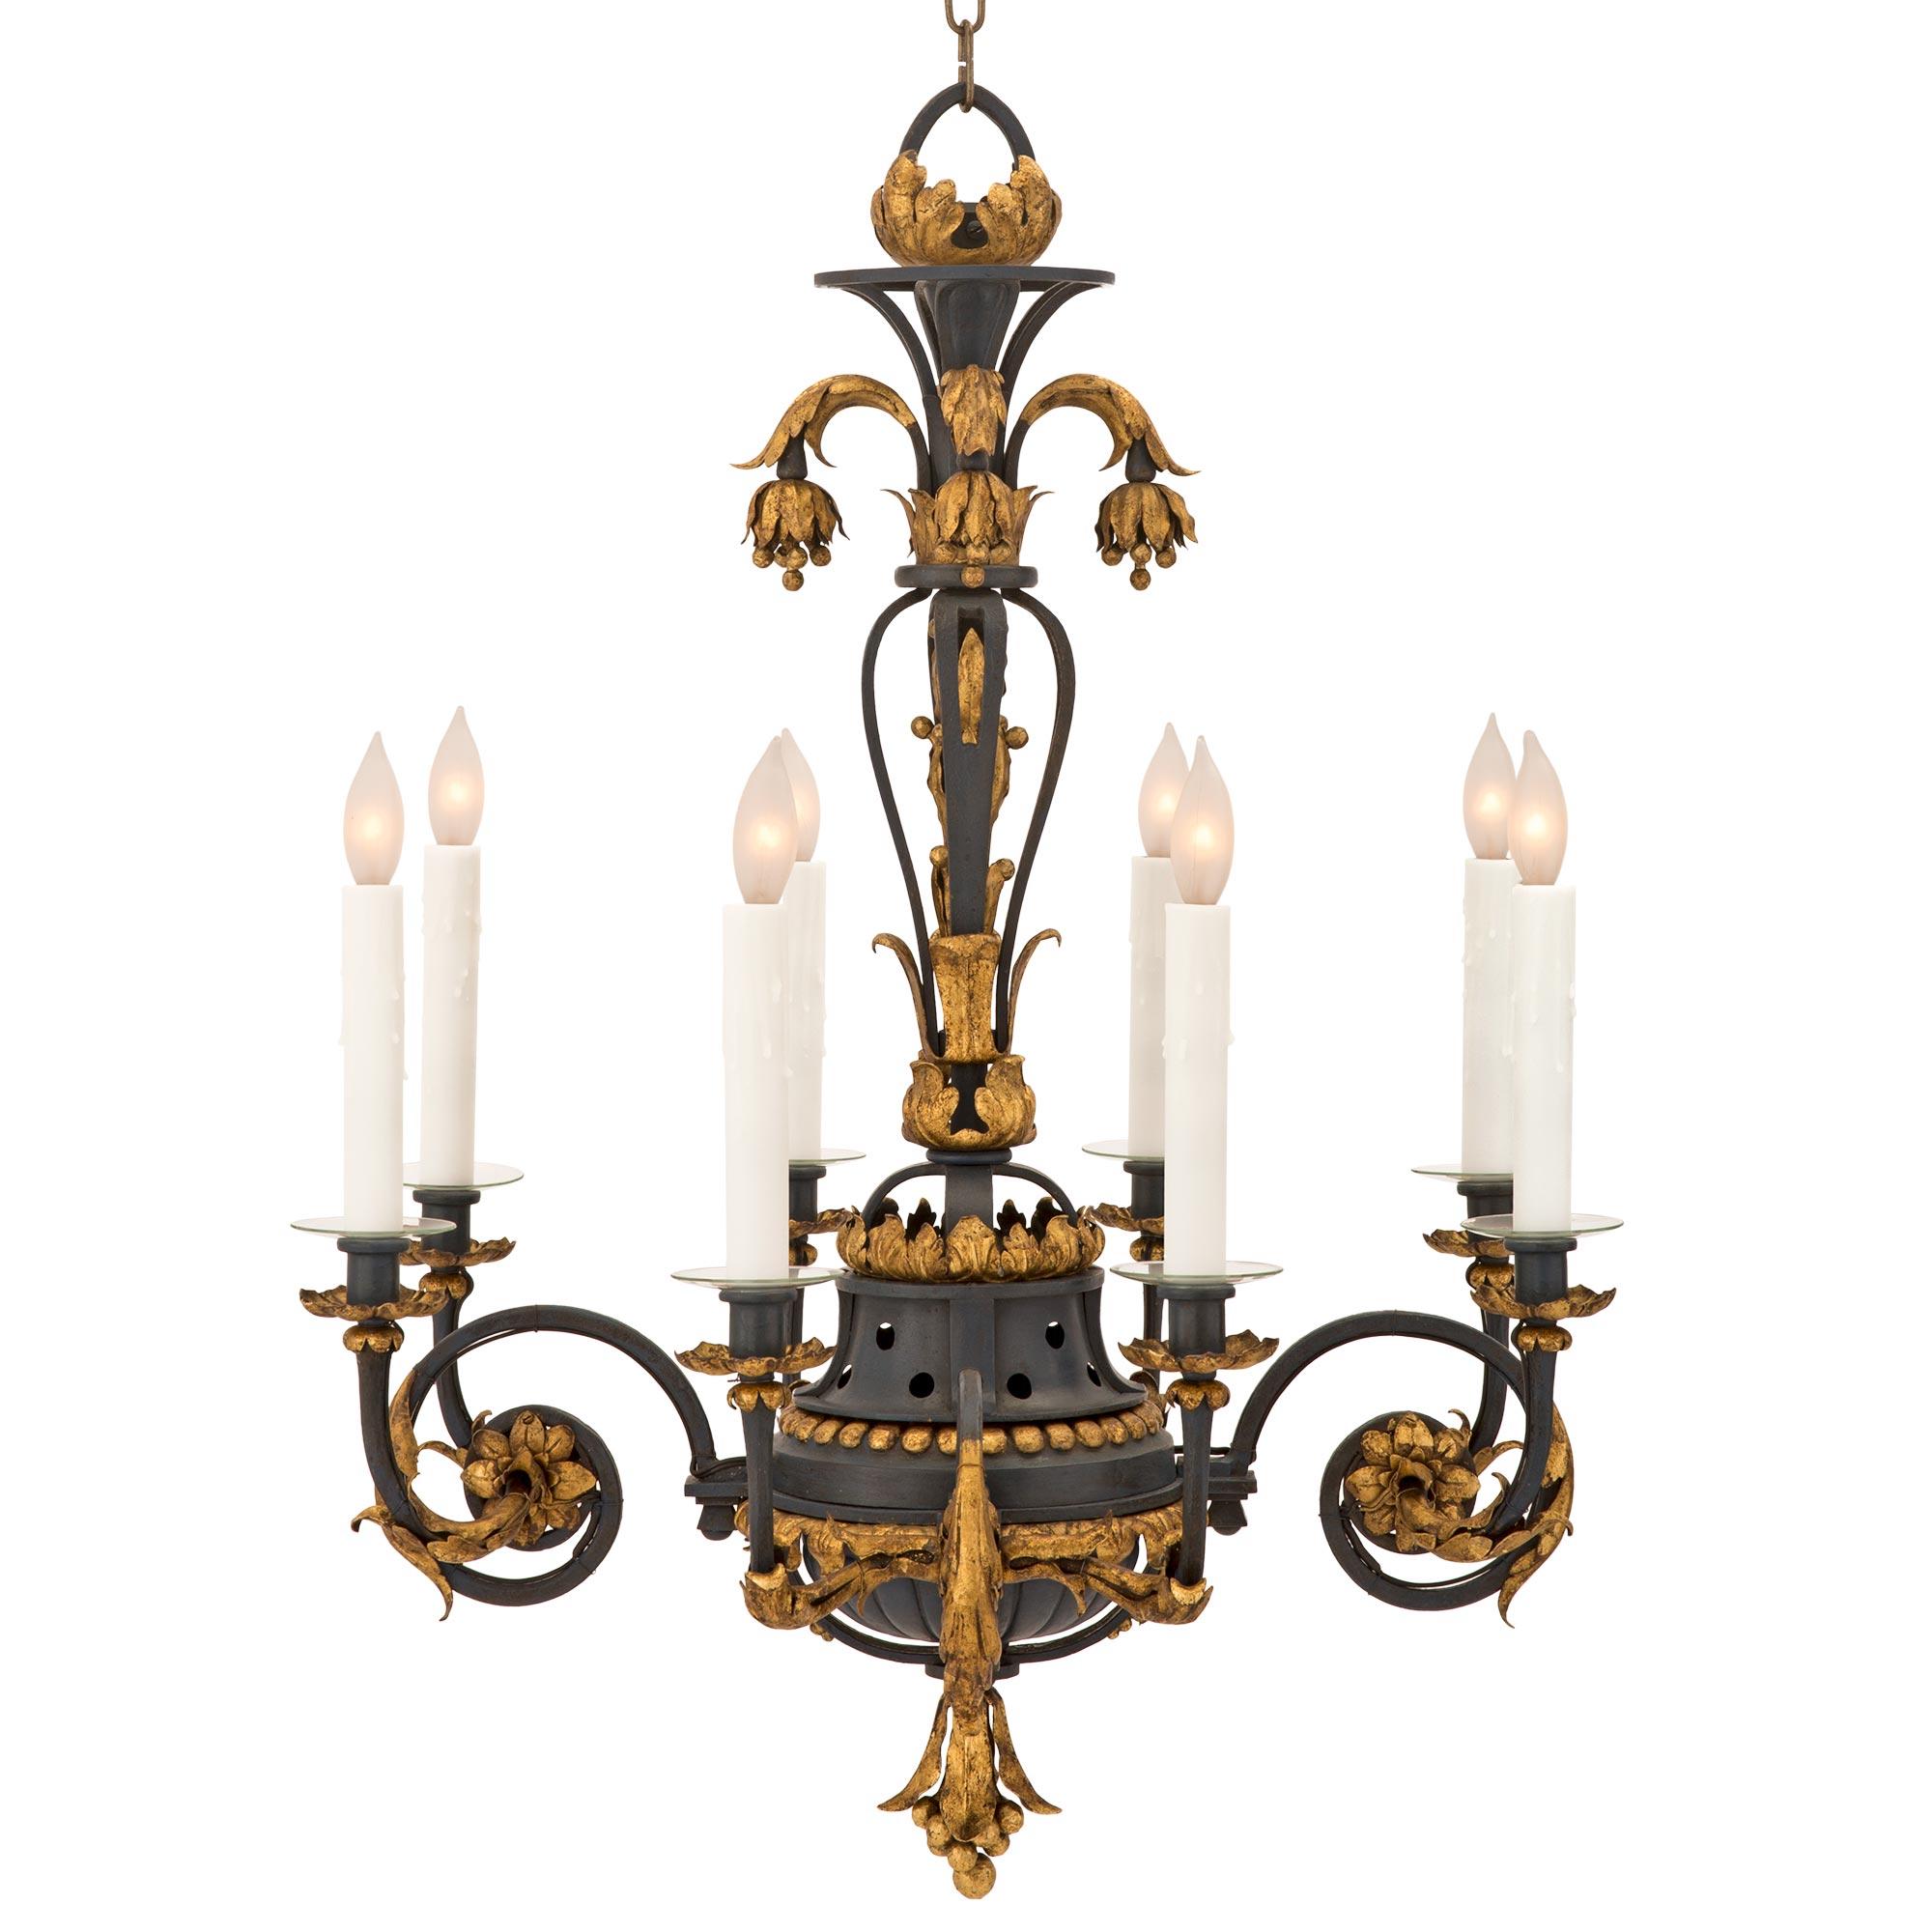 A beautiful and most decorative Country French 19th century patinated dark blue wrought iron and gilt metal chandelier. The eight-arm chandelier is centered by a beautiful charming berried and foliate bottom finial below the elegant reeded body.